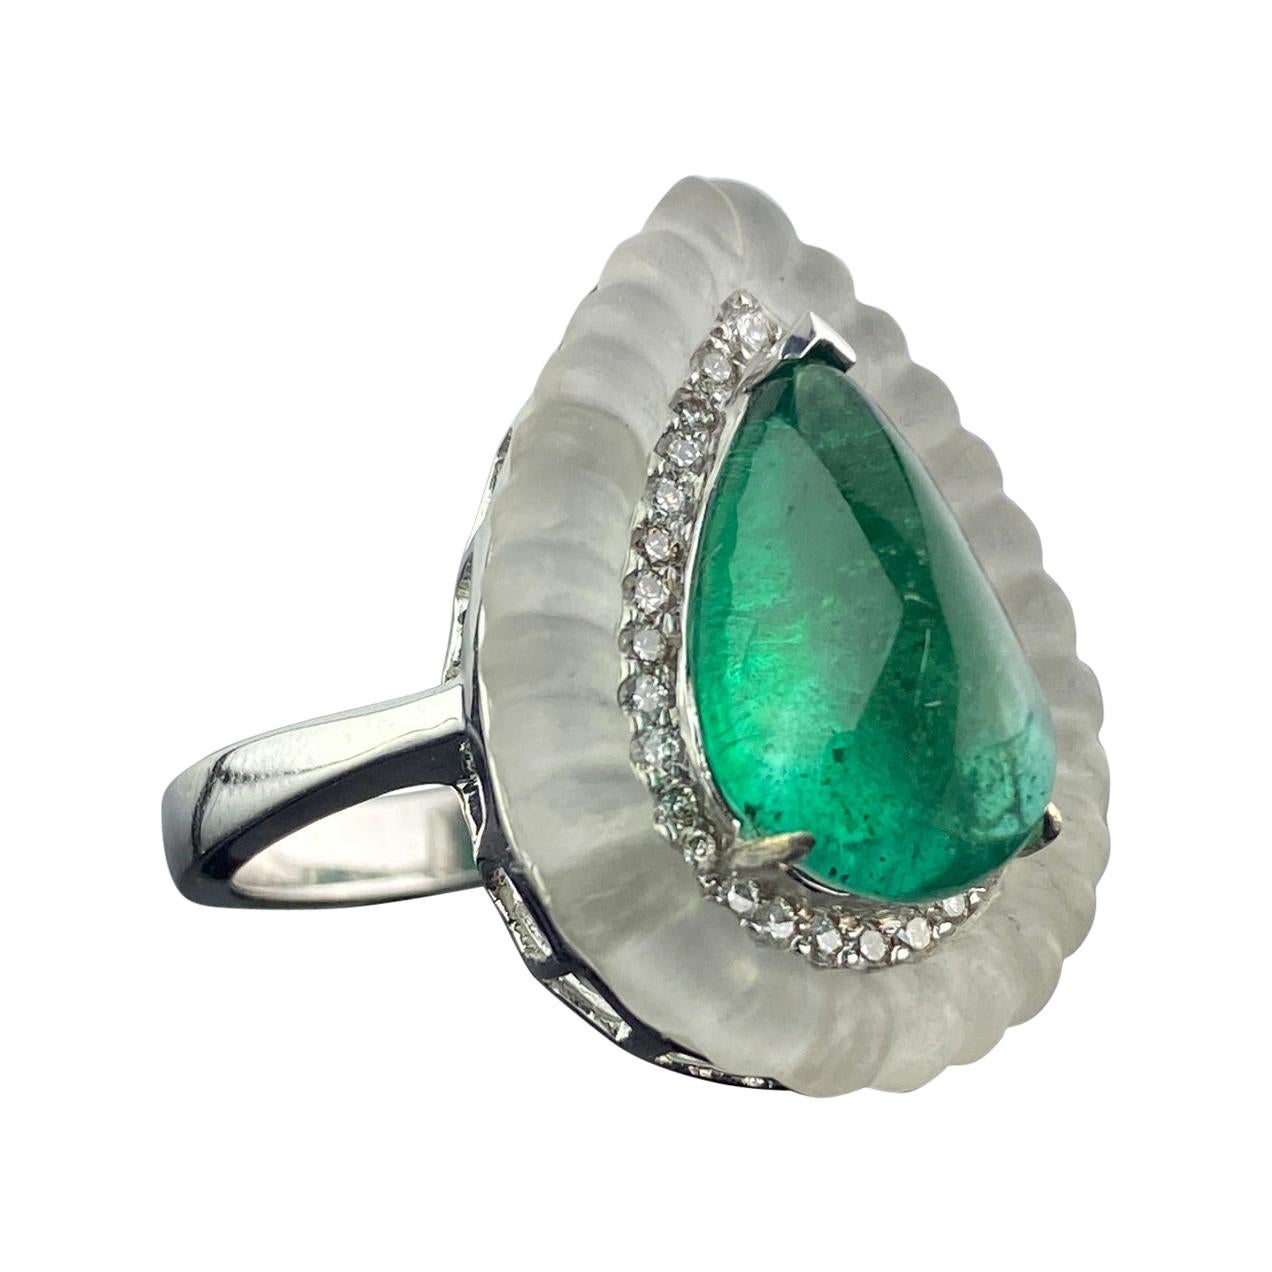 5.15 Carat Pear Shape Cabochon Emerald Art Deco Style Ring For Sale